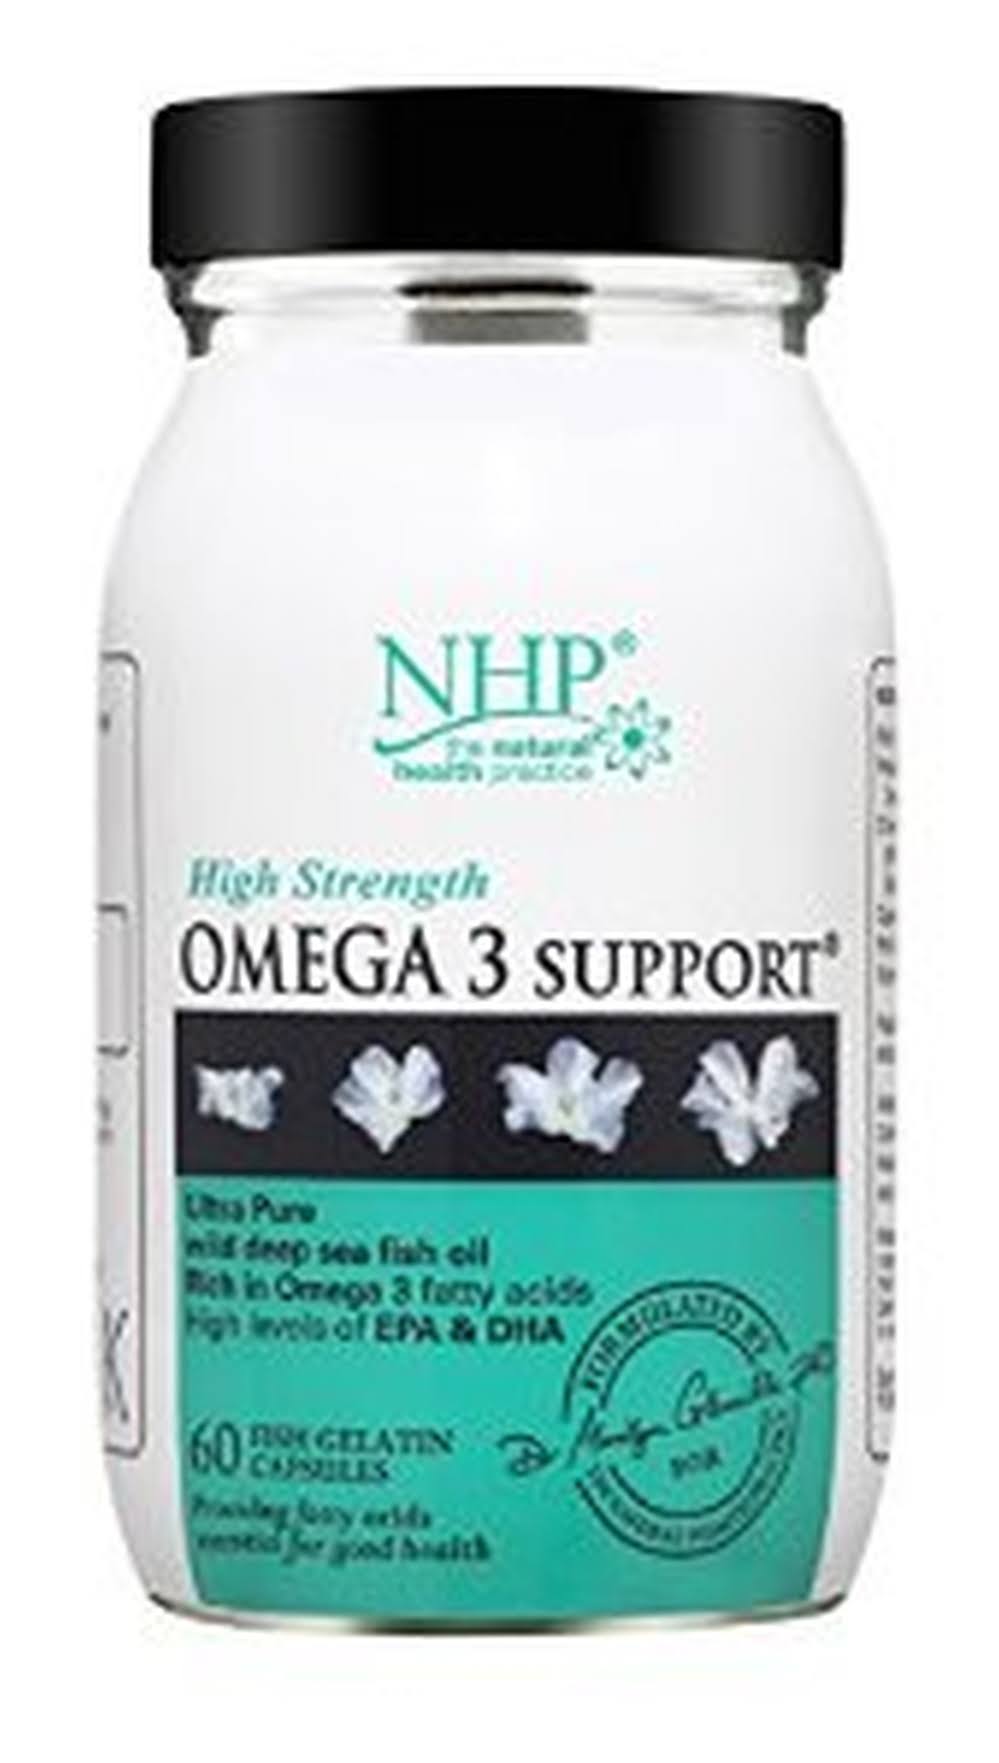 NHP Omega 3 Support Fish Gelatin Capsules - Peppermmint, 60ct